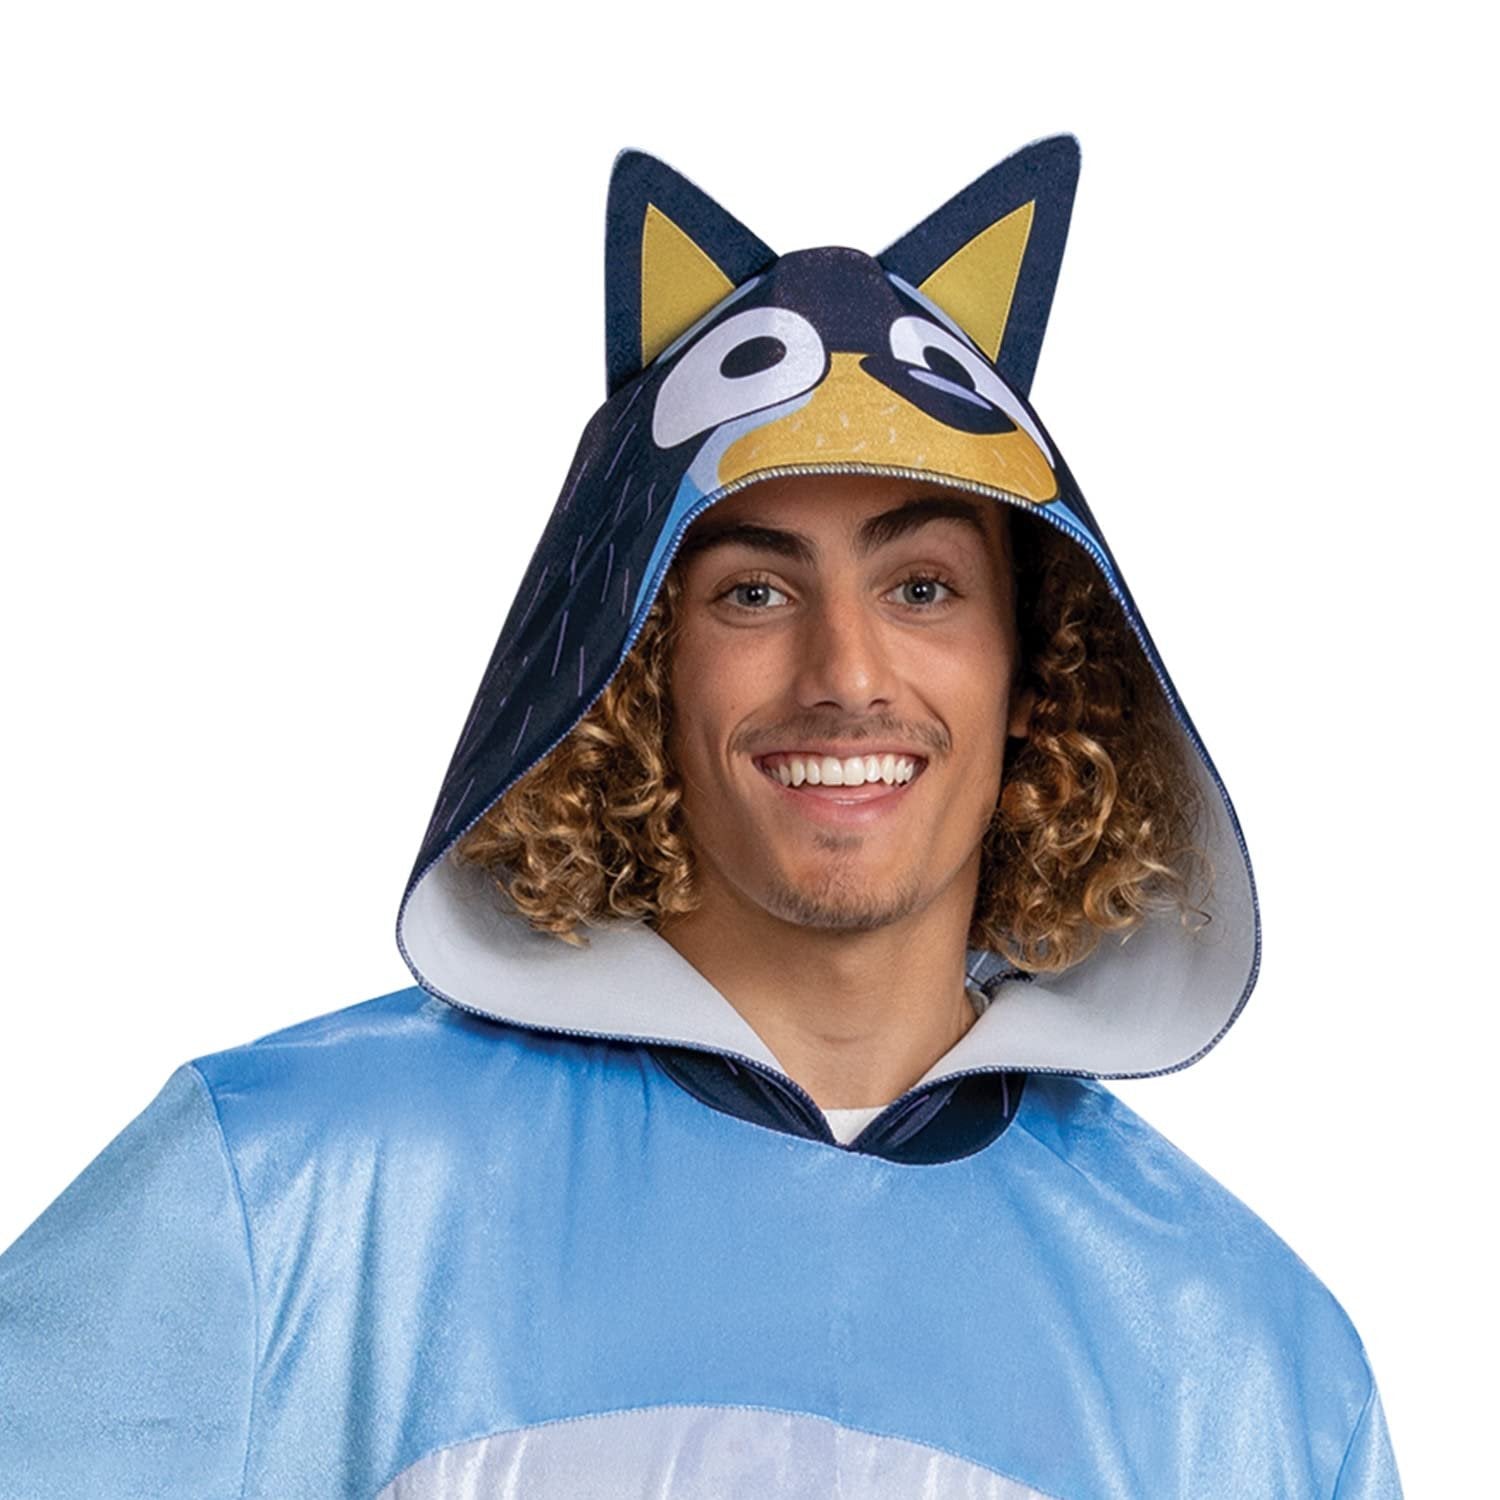 Disguise Bluey Bandit Costume, Official Bluey Dad Costume and Headpiece, One Size Large/XL (42-46)